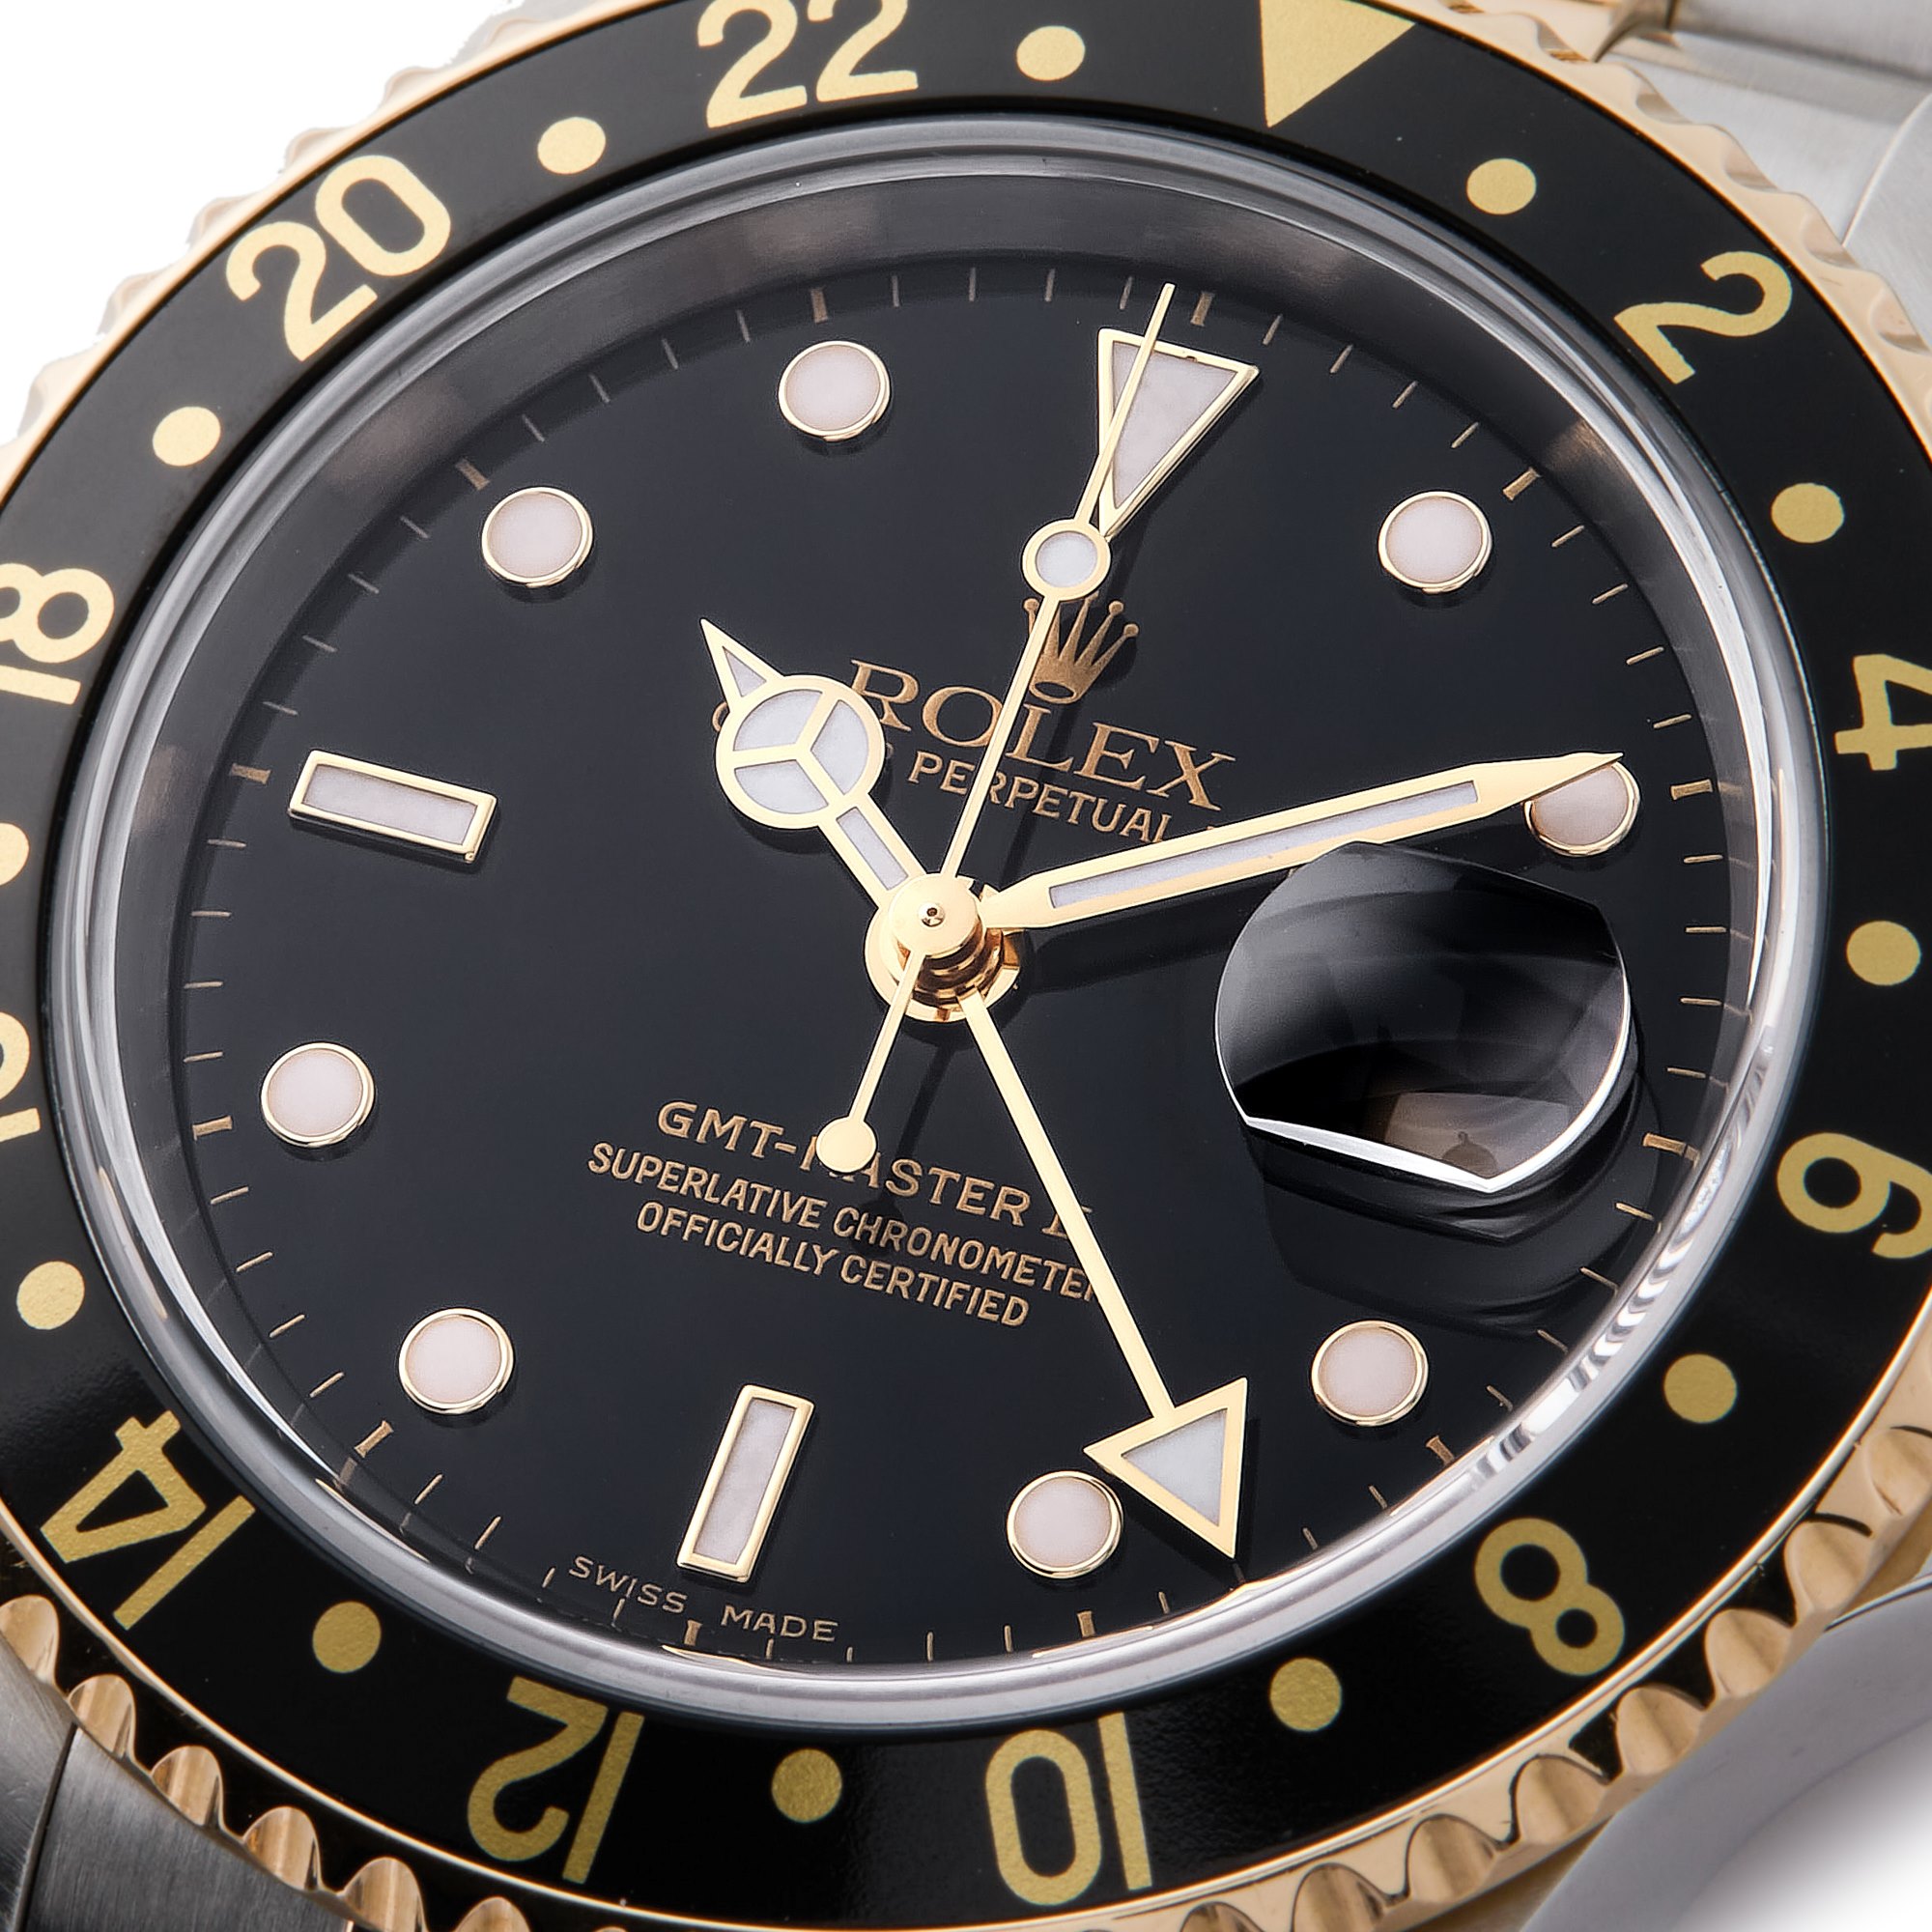 Rolex GMT-Master II Yellow Gold & Stainless Steel 16713